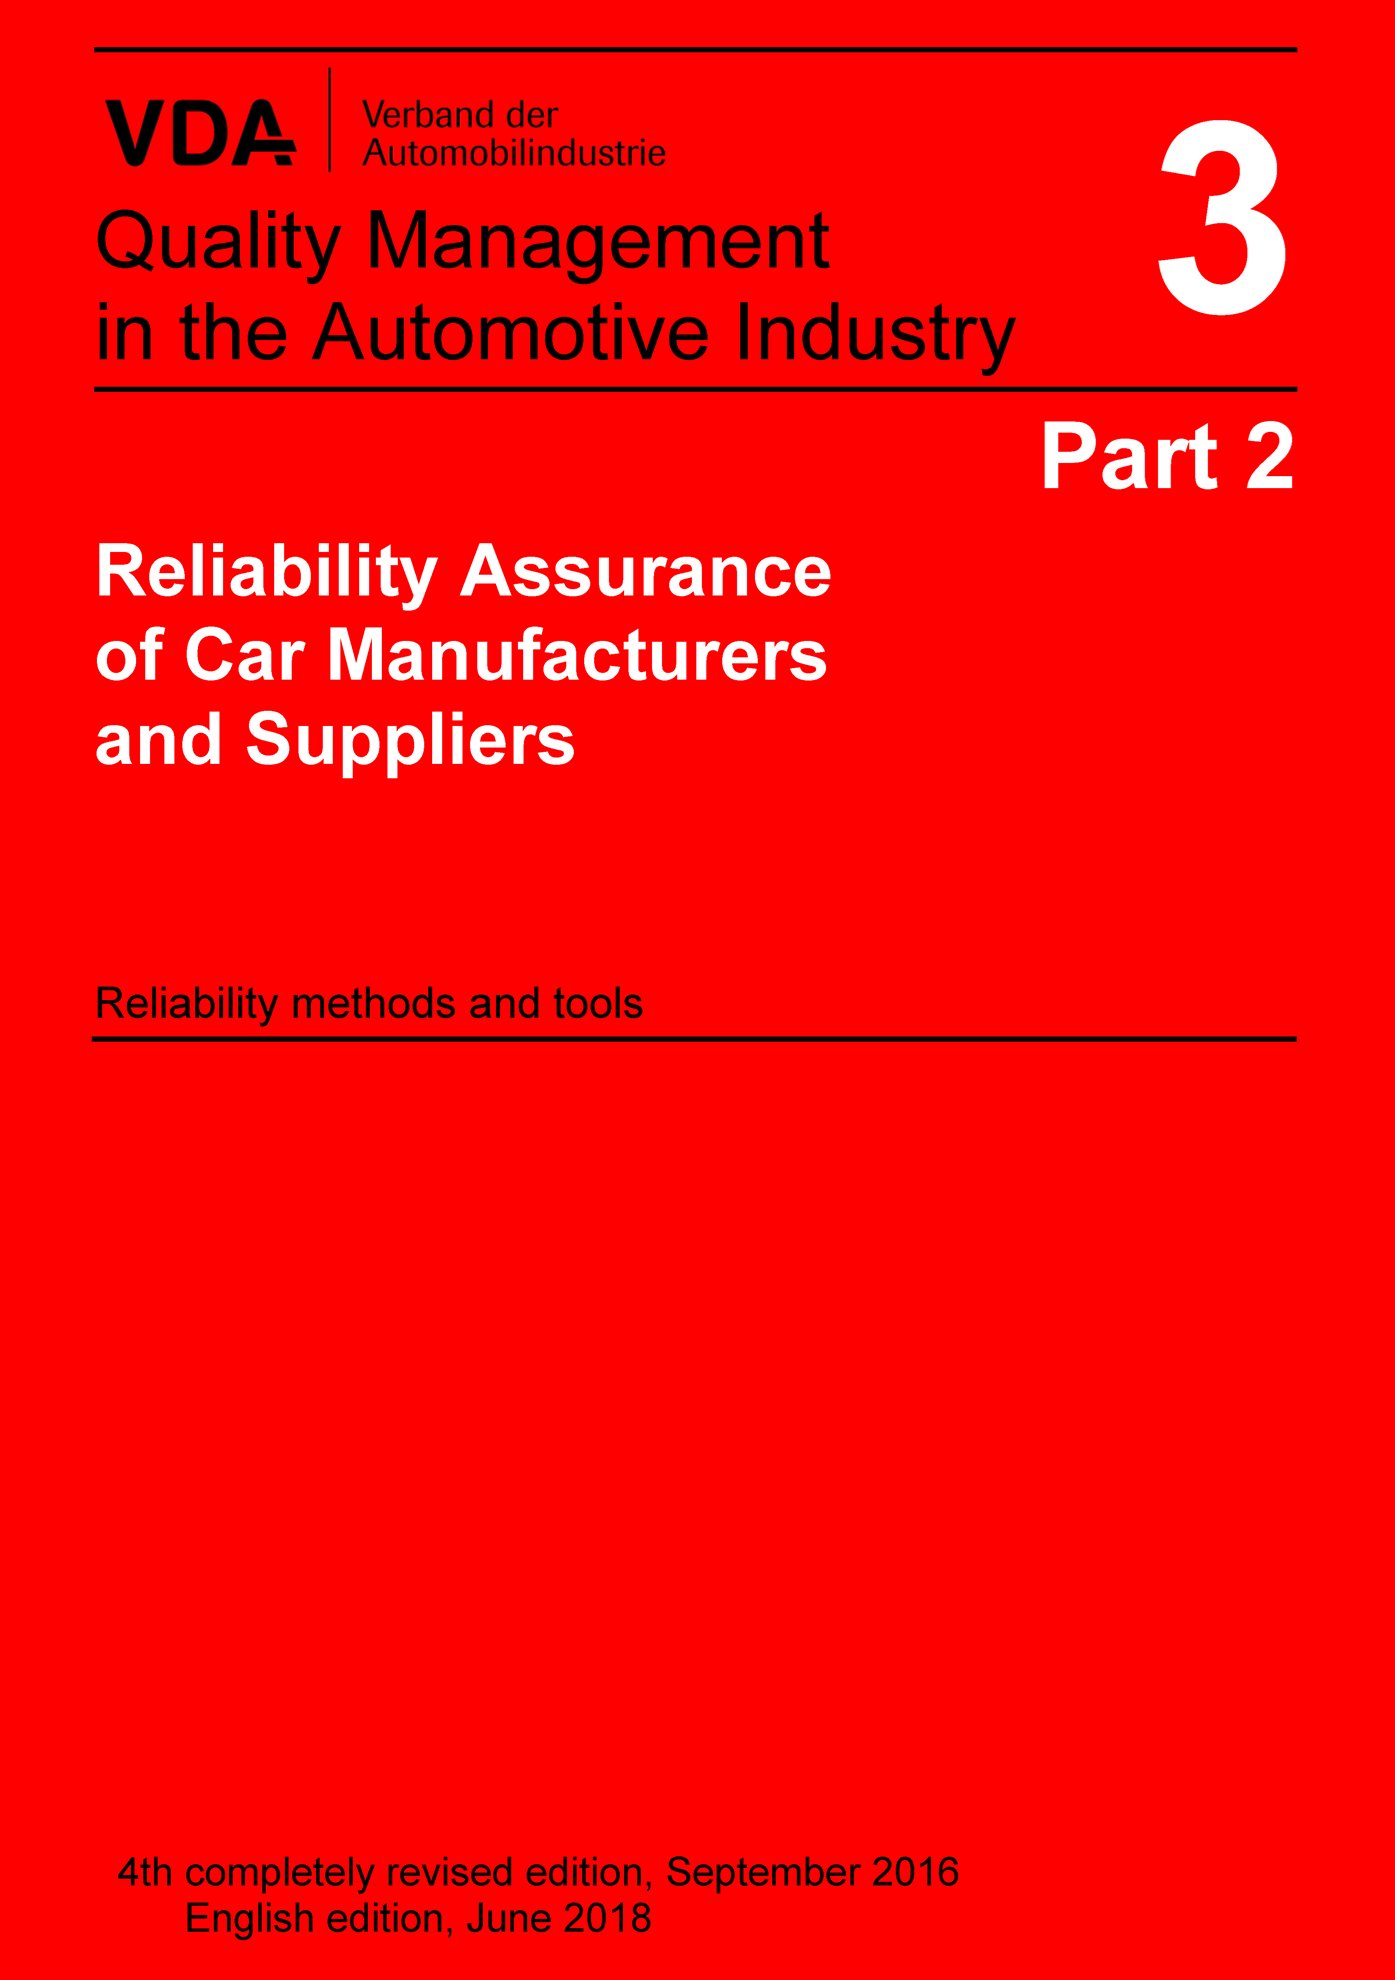 VDA Volume 3 Part 2, 4th completely revised edition 2016 Reliability Assurance of Car Manufacturers and Suppliers Reliability methods and tools 1.1.2016